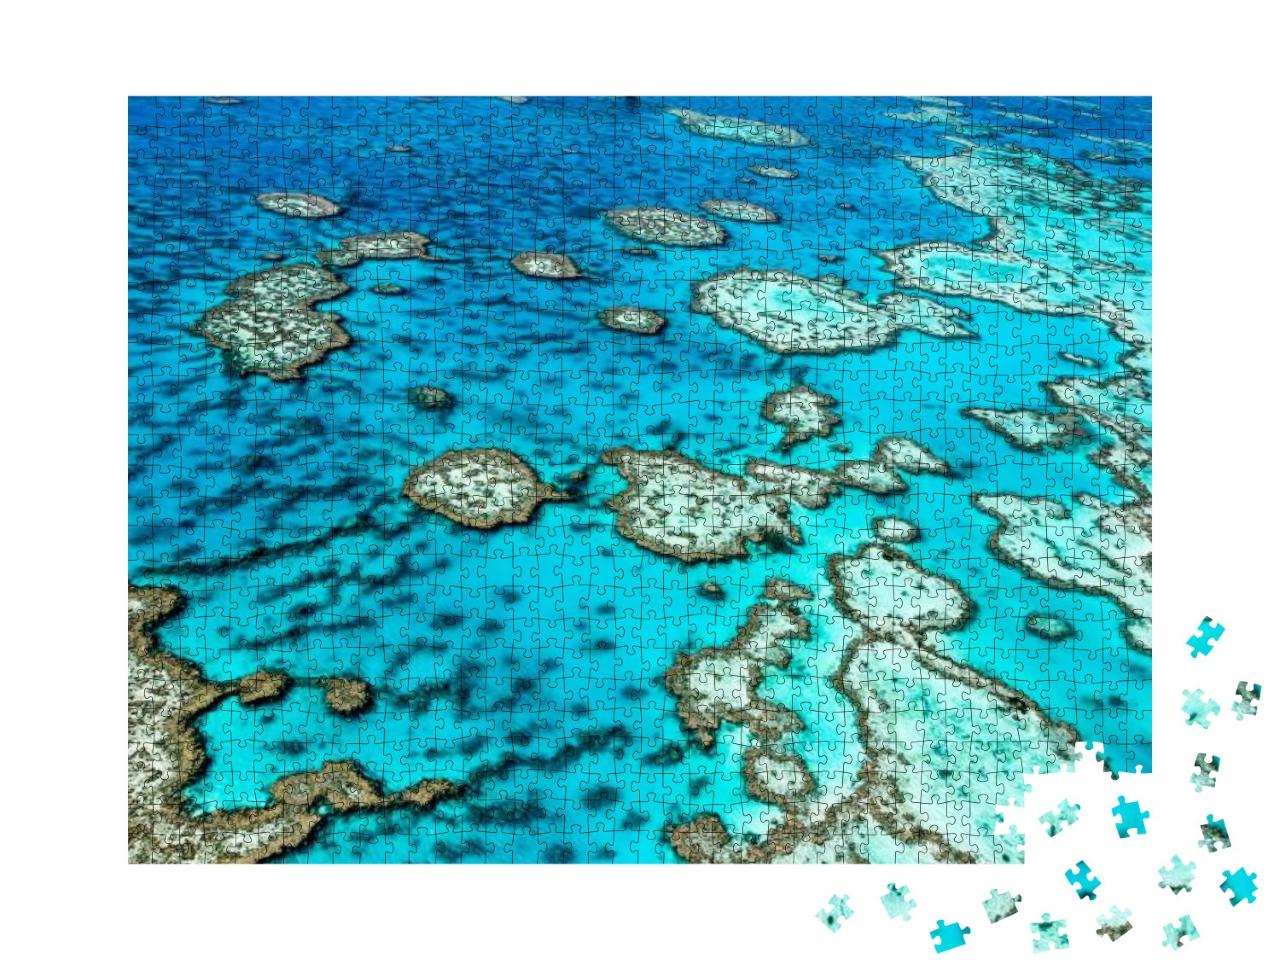 The Great Barrier Reef in Queensland, Australia... Jigsaw Puzzle with 1000 pieces